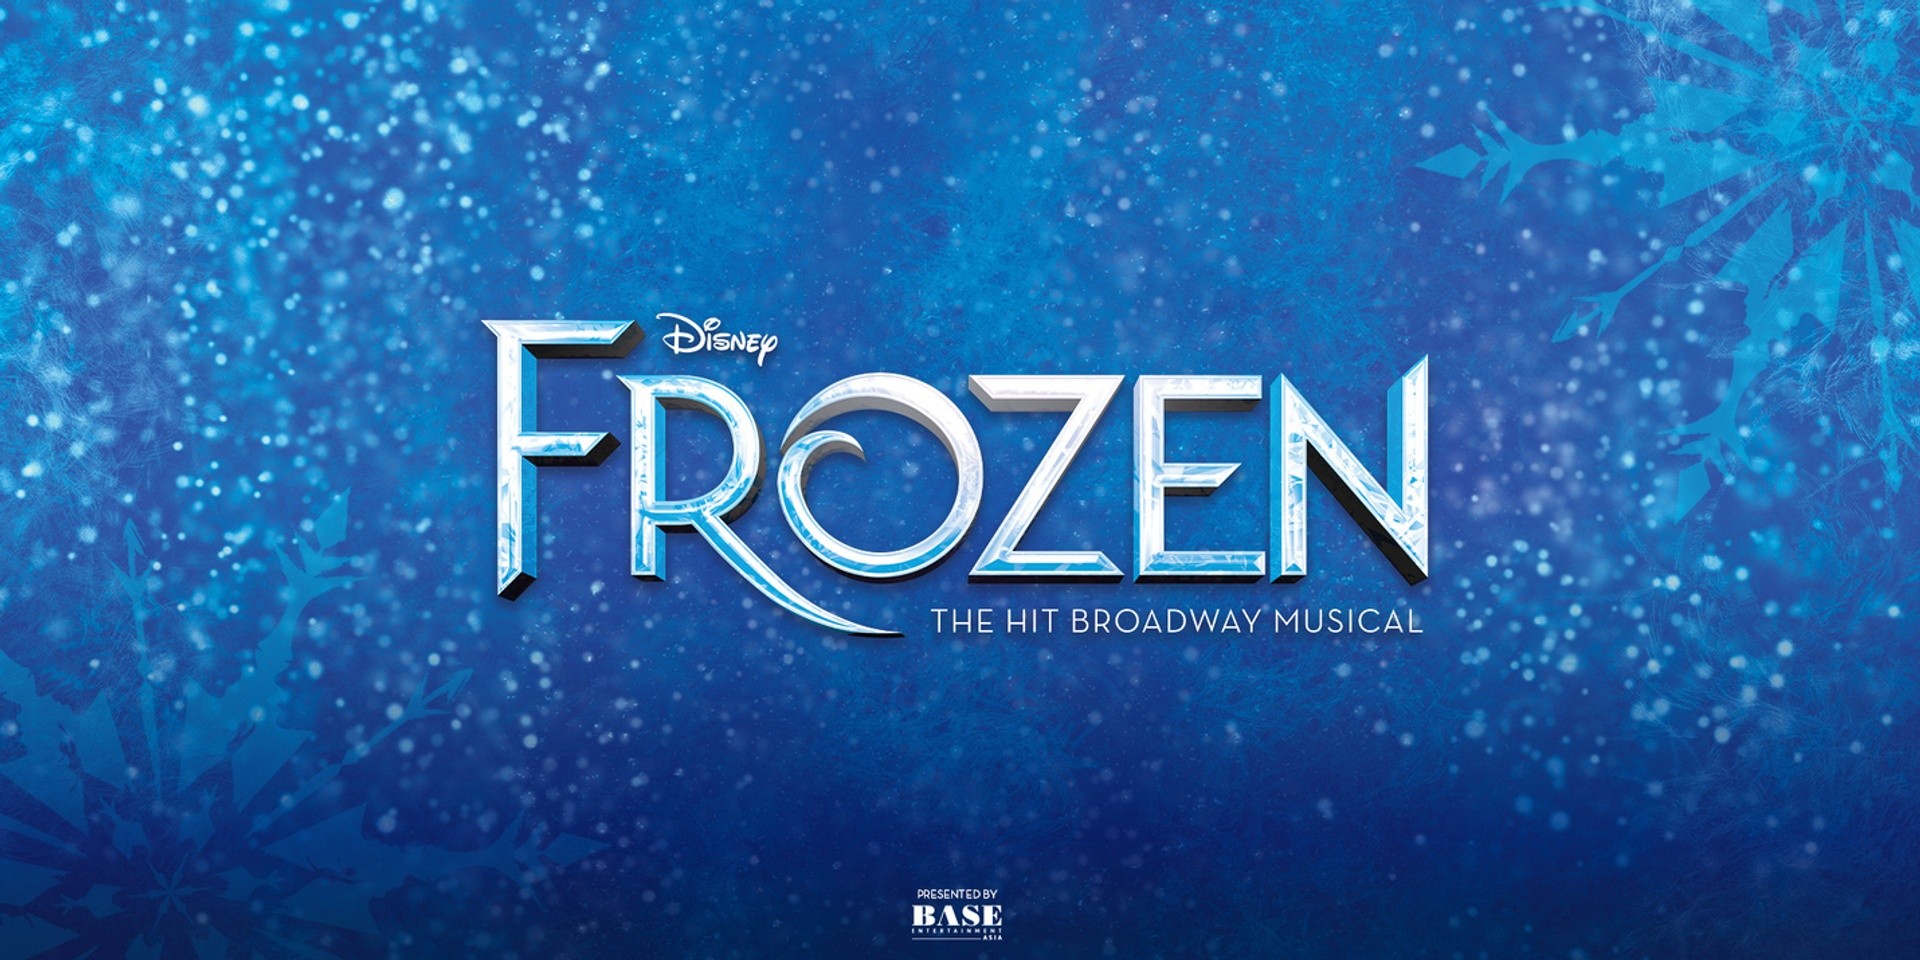 Disney's Frozen The Hit Broadway Musical to make Singapore debut in 2023